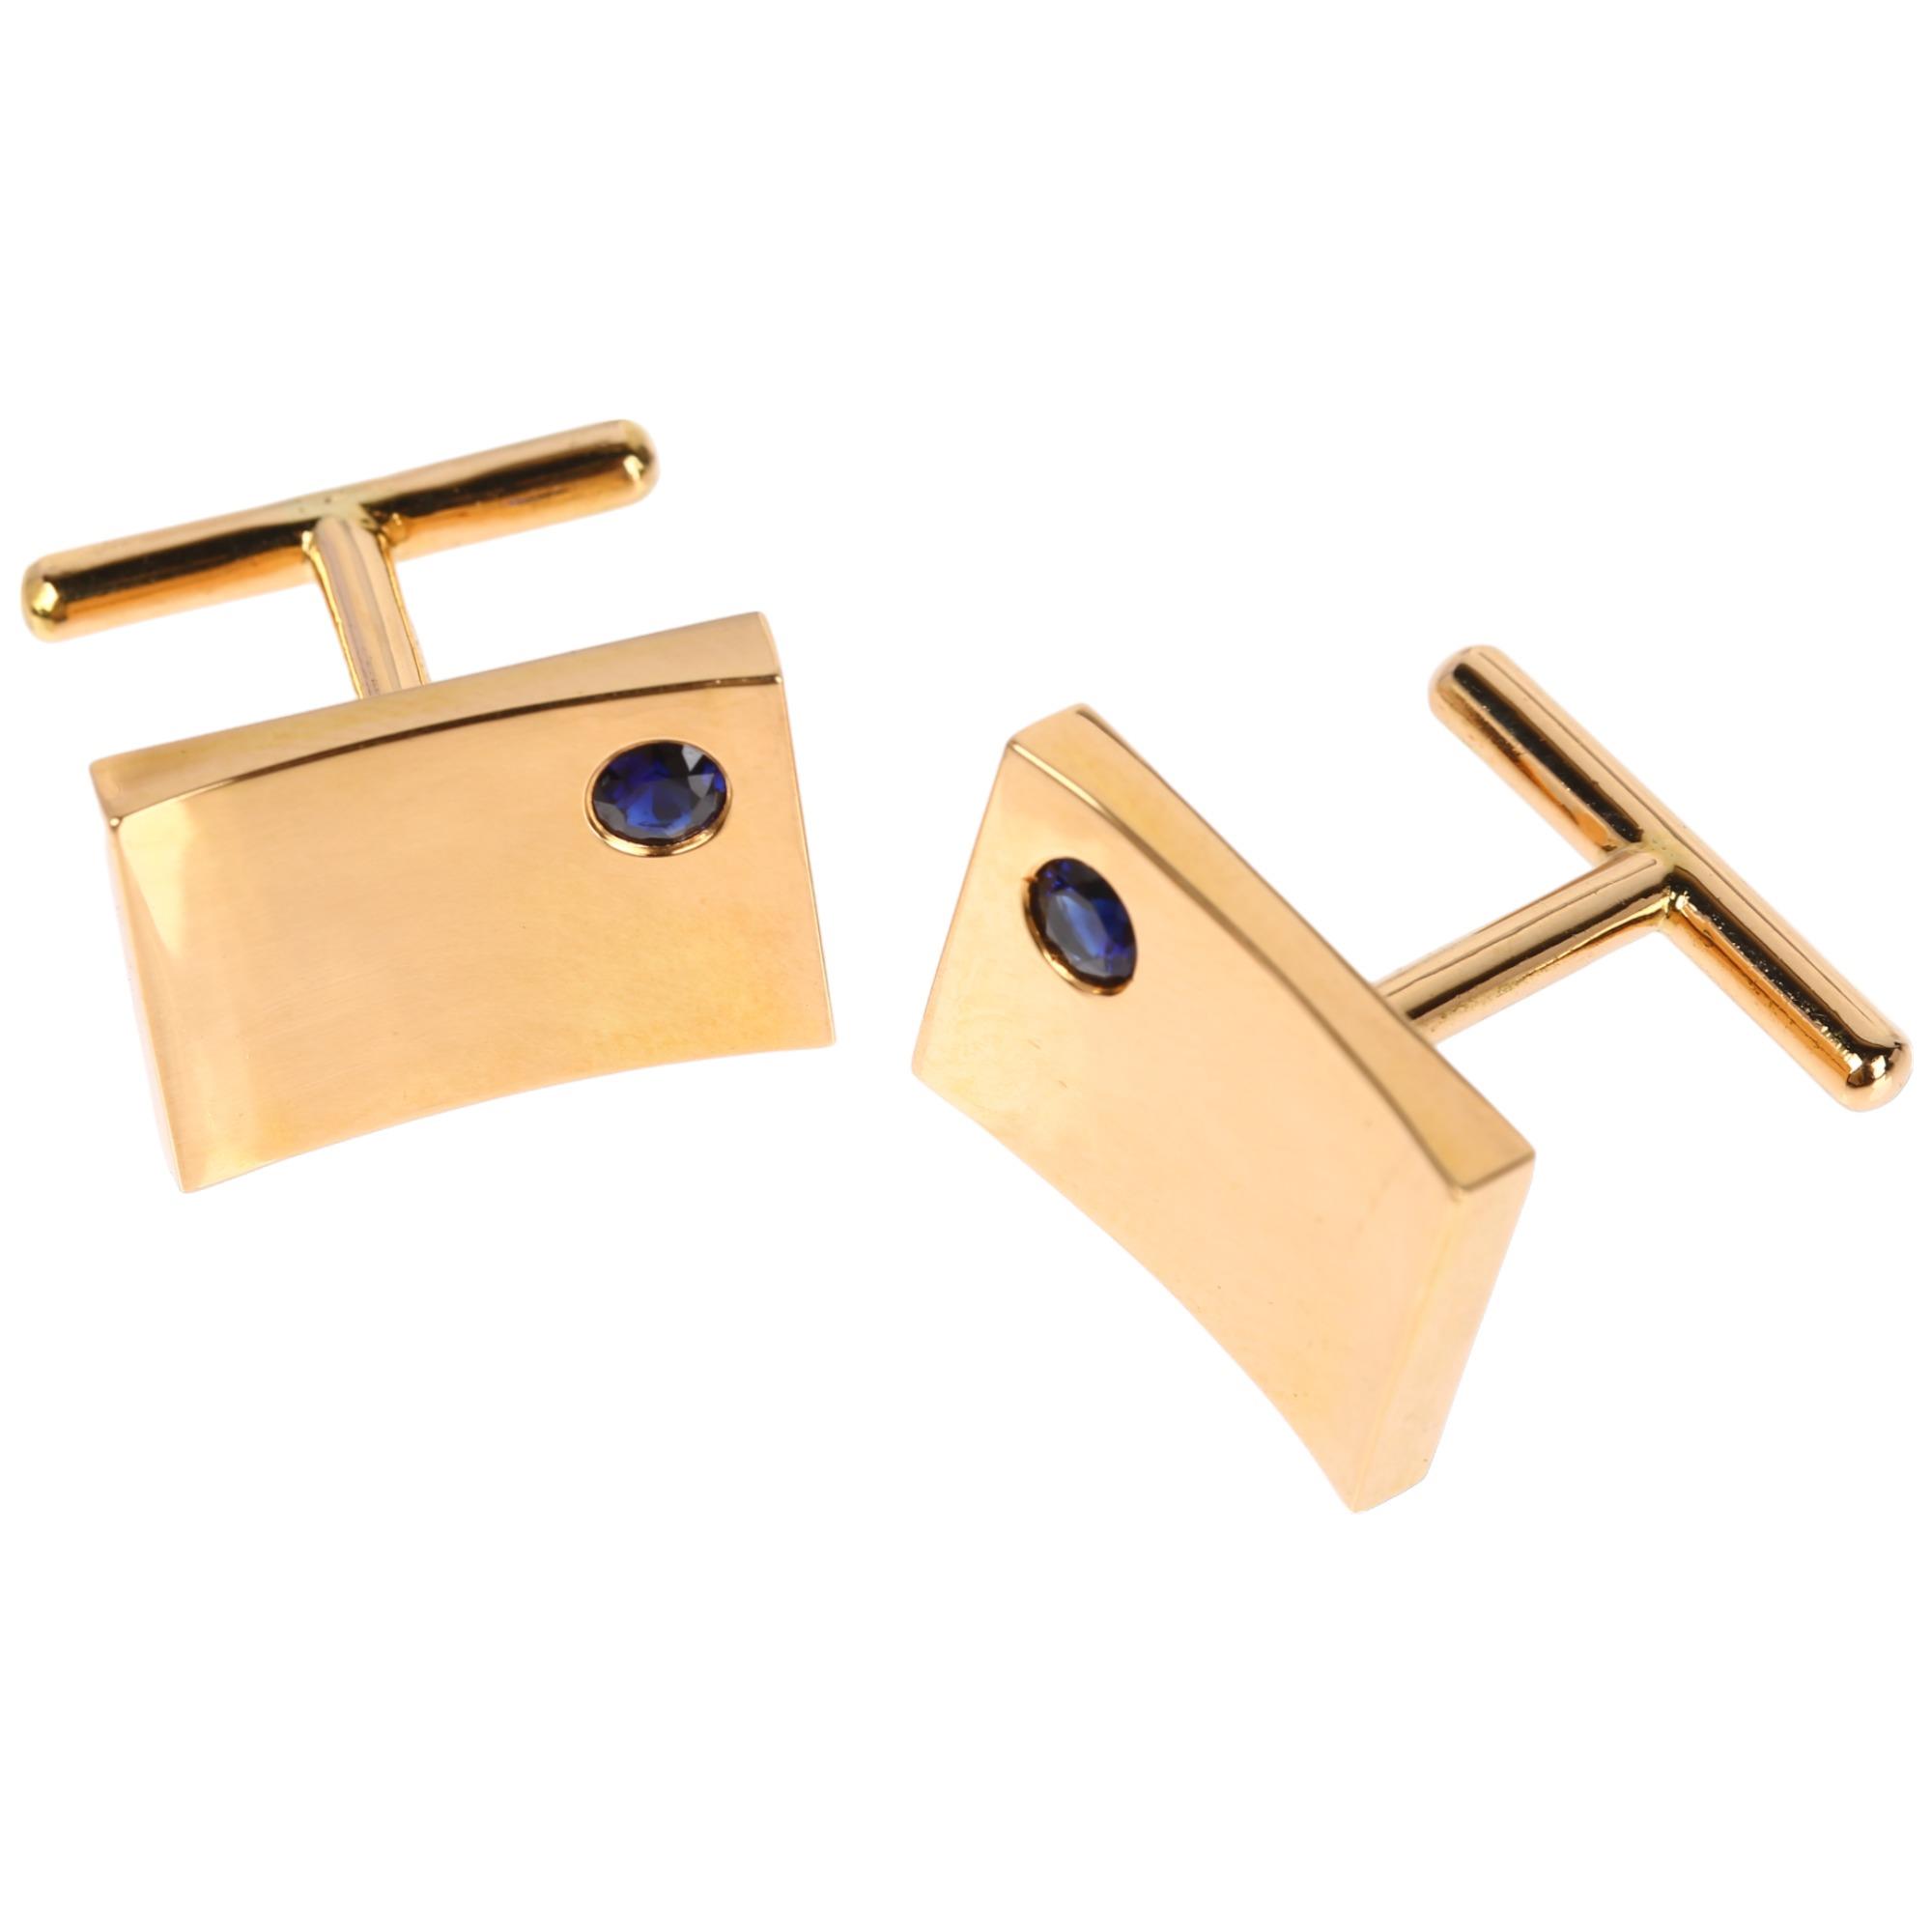 A pair of Ceylon sapphire cufflinks, by Vogue Jewellers Ltd, unmarked gold settings with rectangular - Image 2 of 4